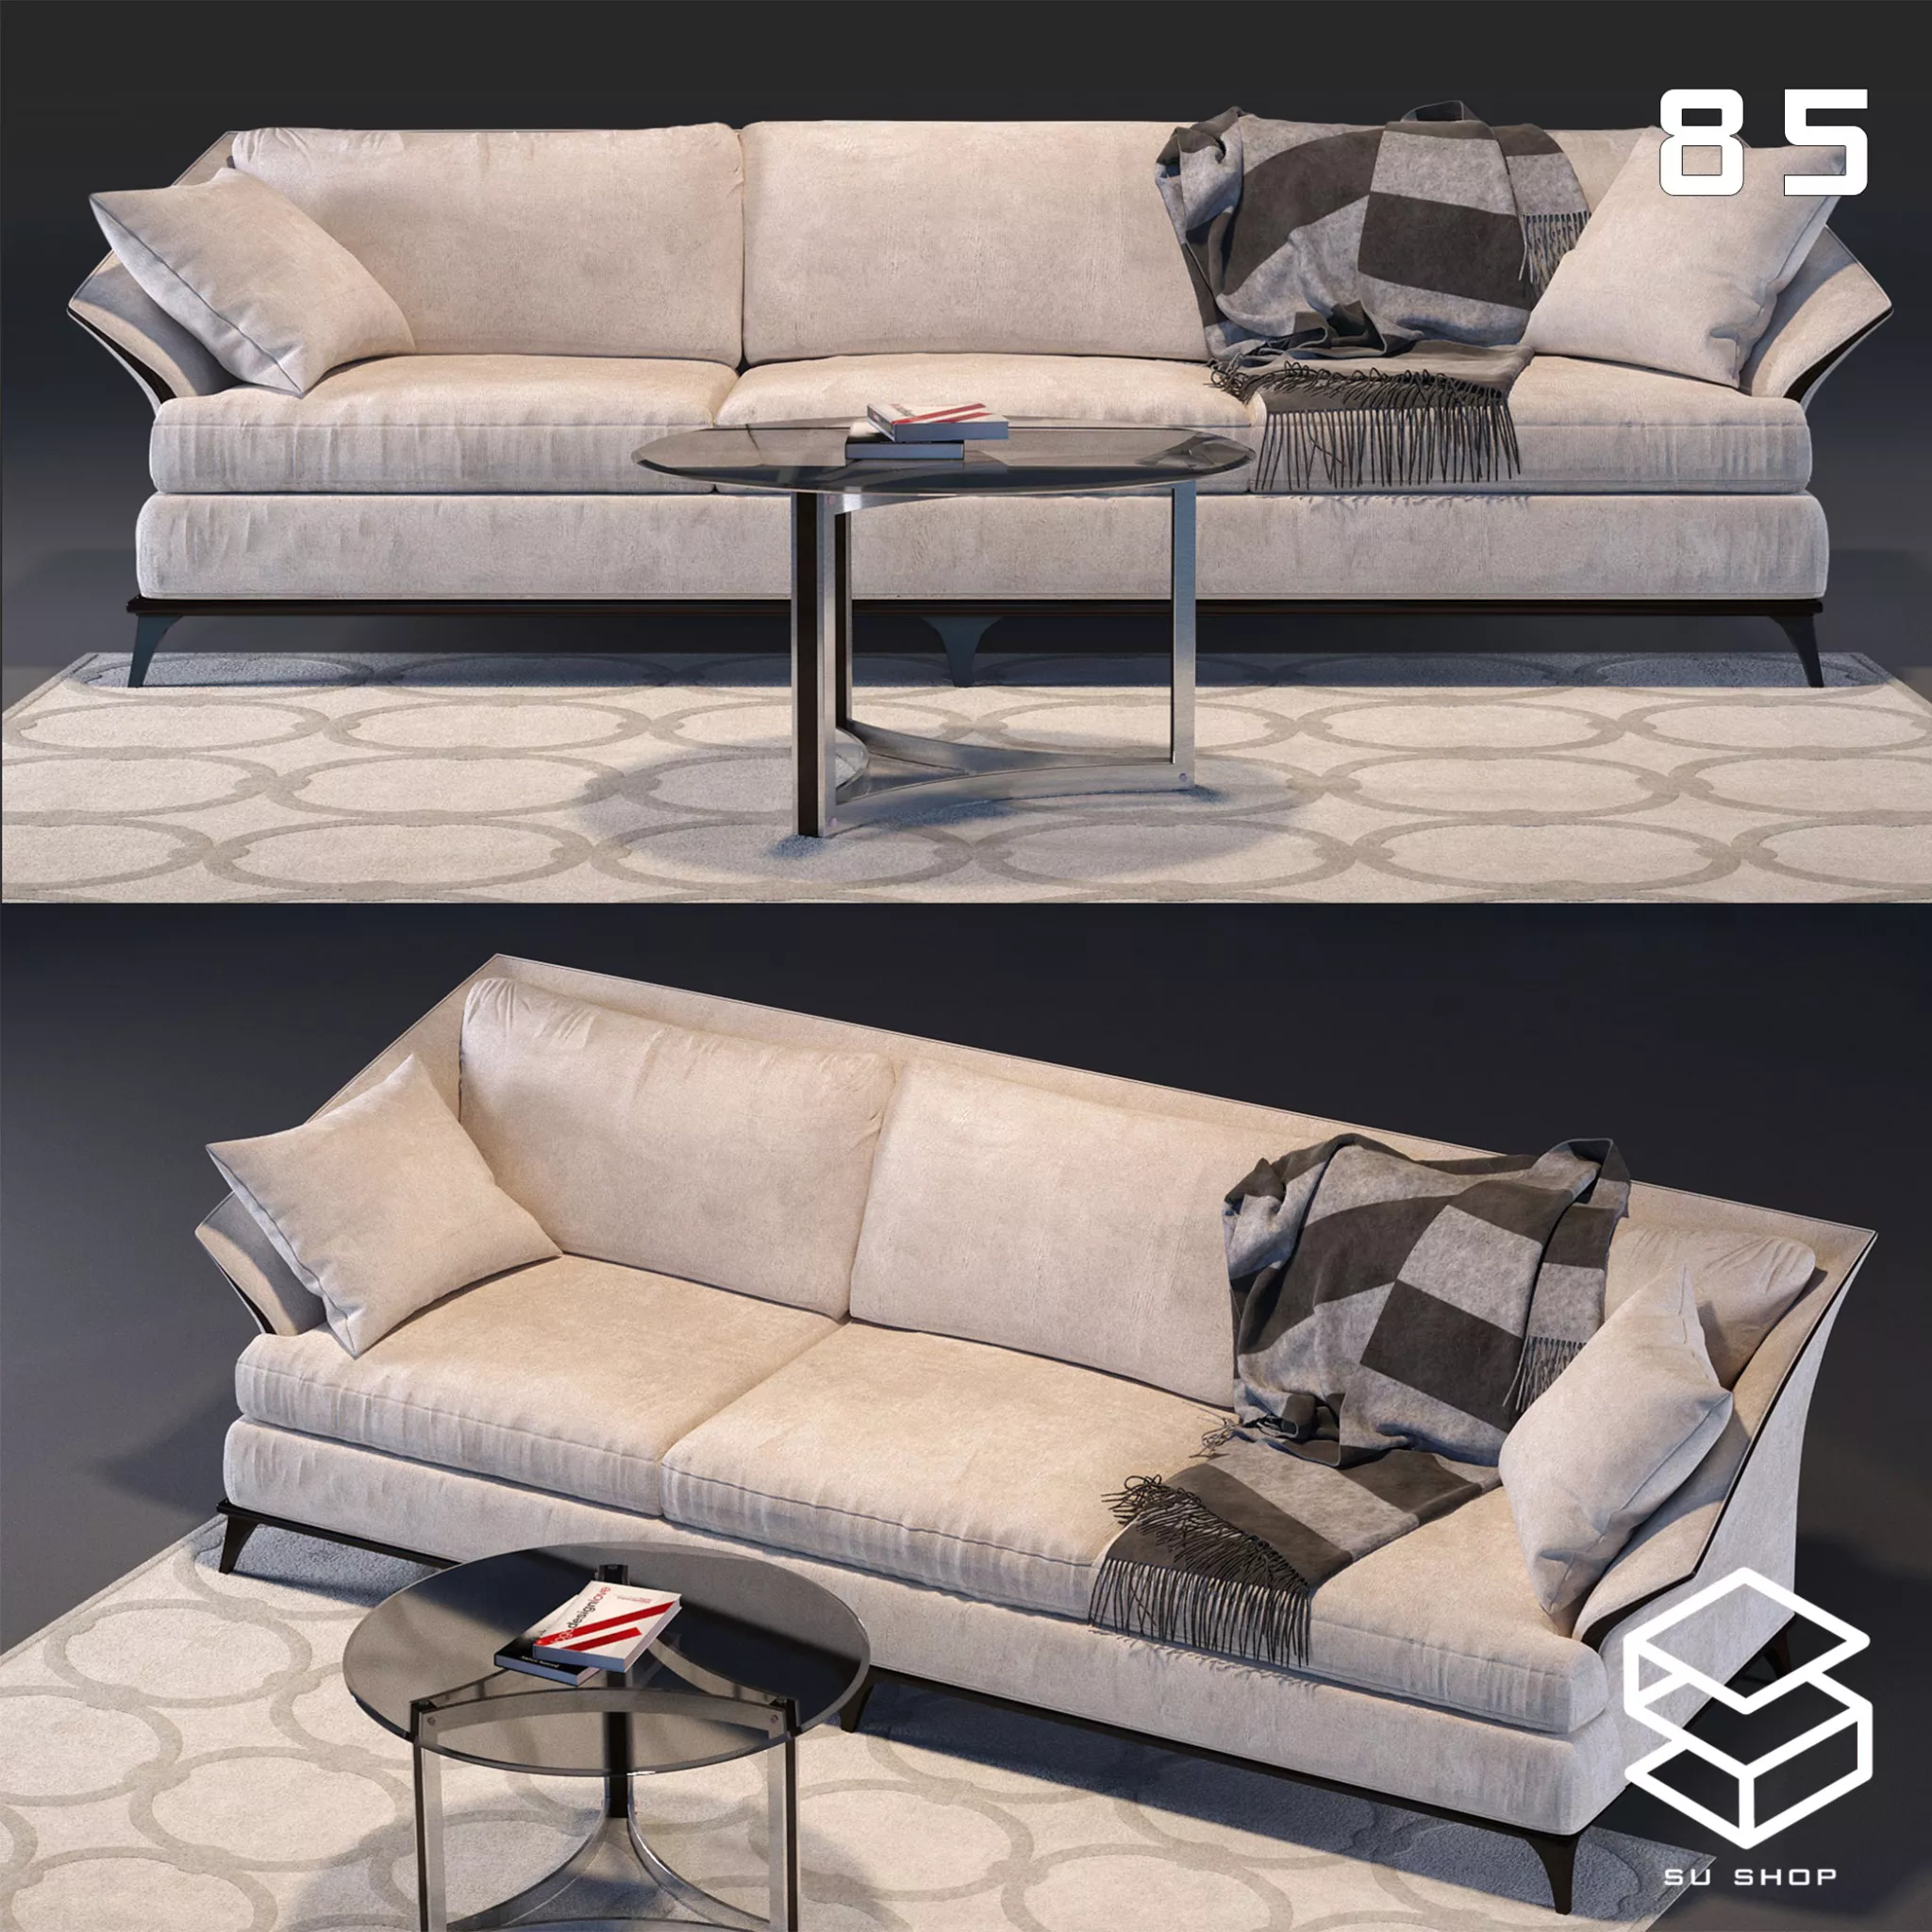 MODERN SOFA - SKETCHUP 3D MODEL - VRAY OR ENSCAPE - ID13713